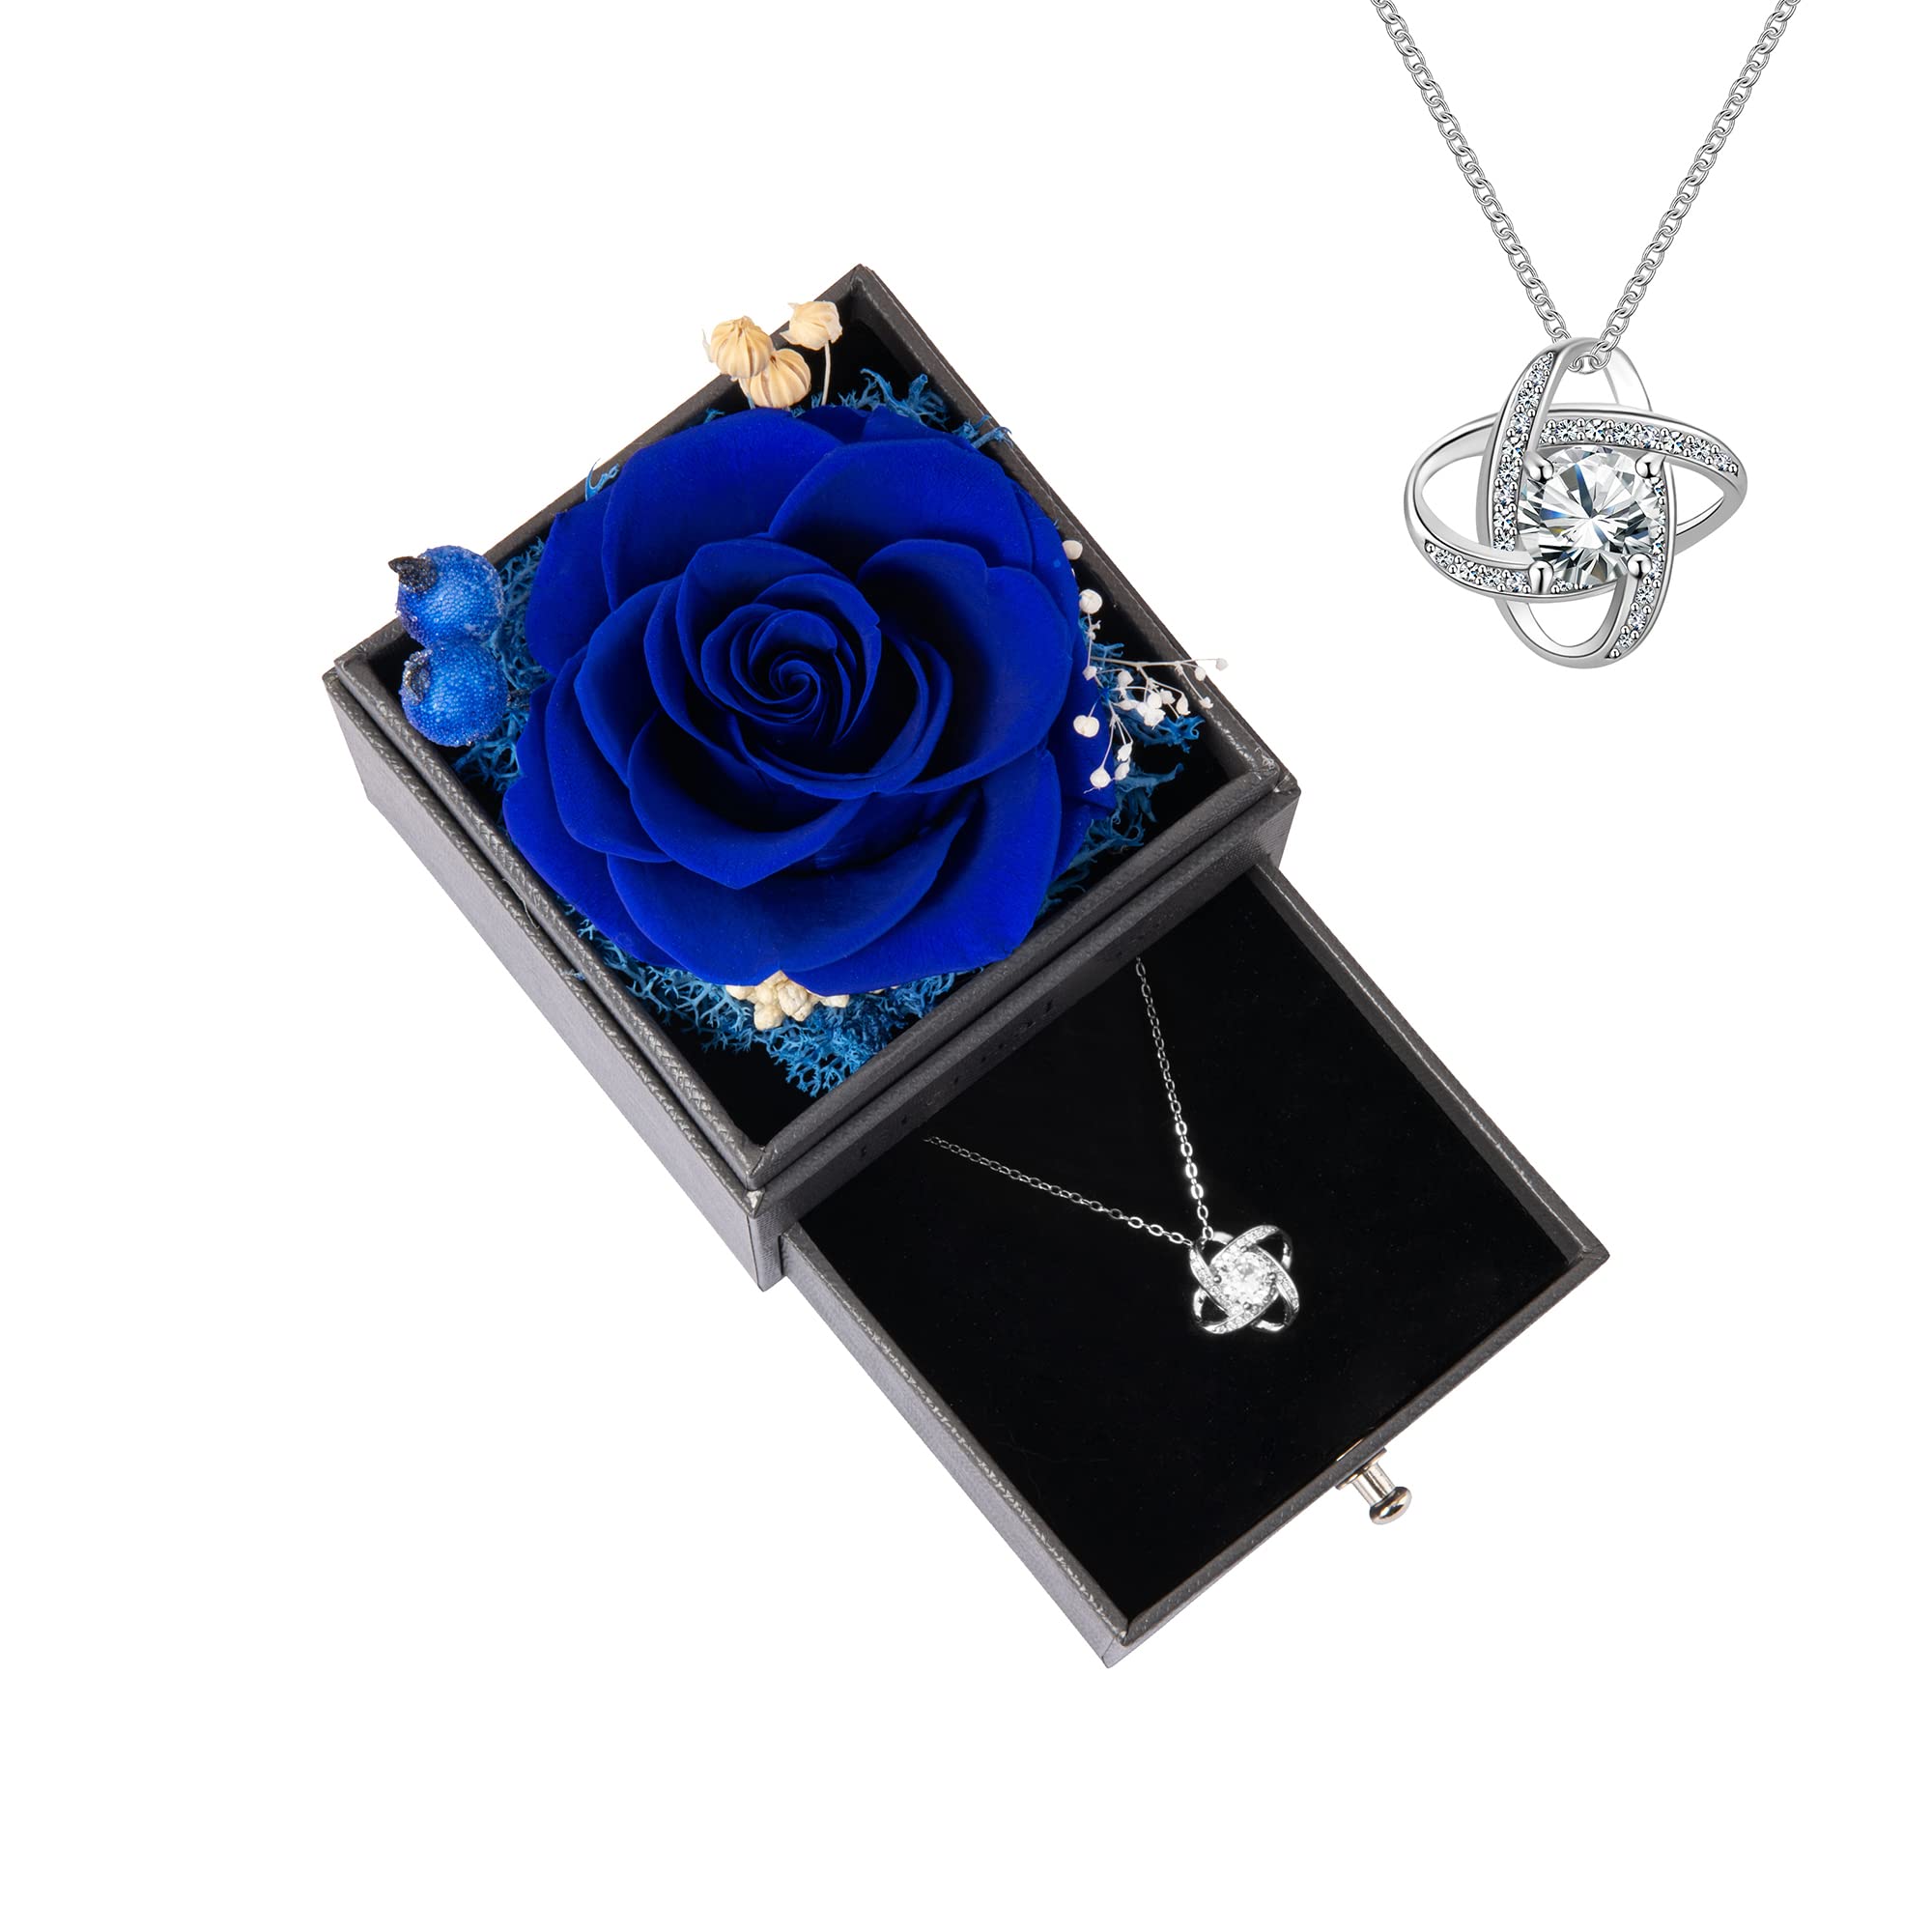 Real Blue Rose Birthday Preserved Flower Gift for Women Girls Simple Dainty Valentine's Day Mother's Day Anniversary Jewelry Gift for Girlfriend Sister Mother Friend Wife